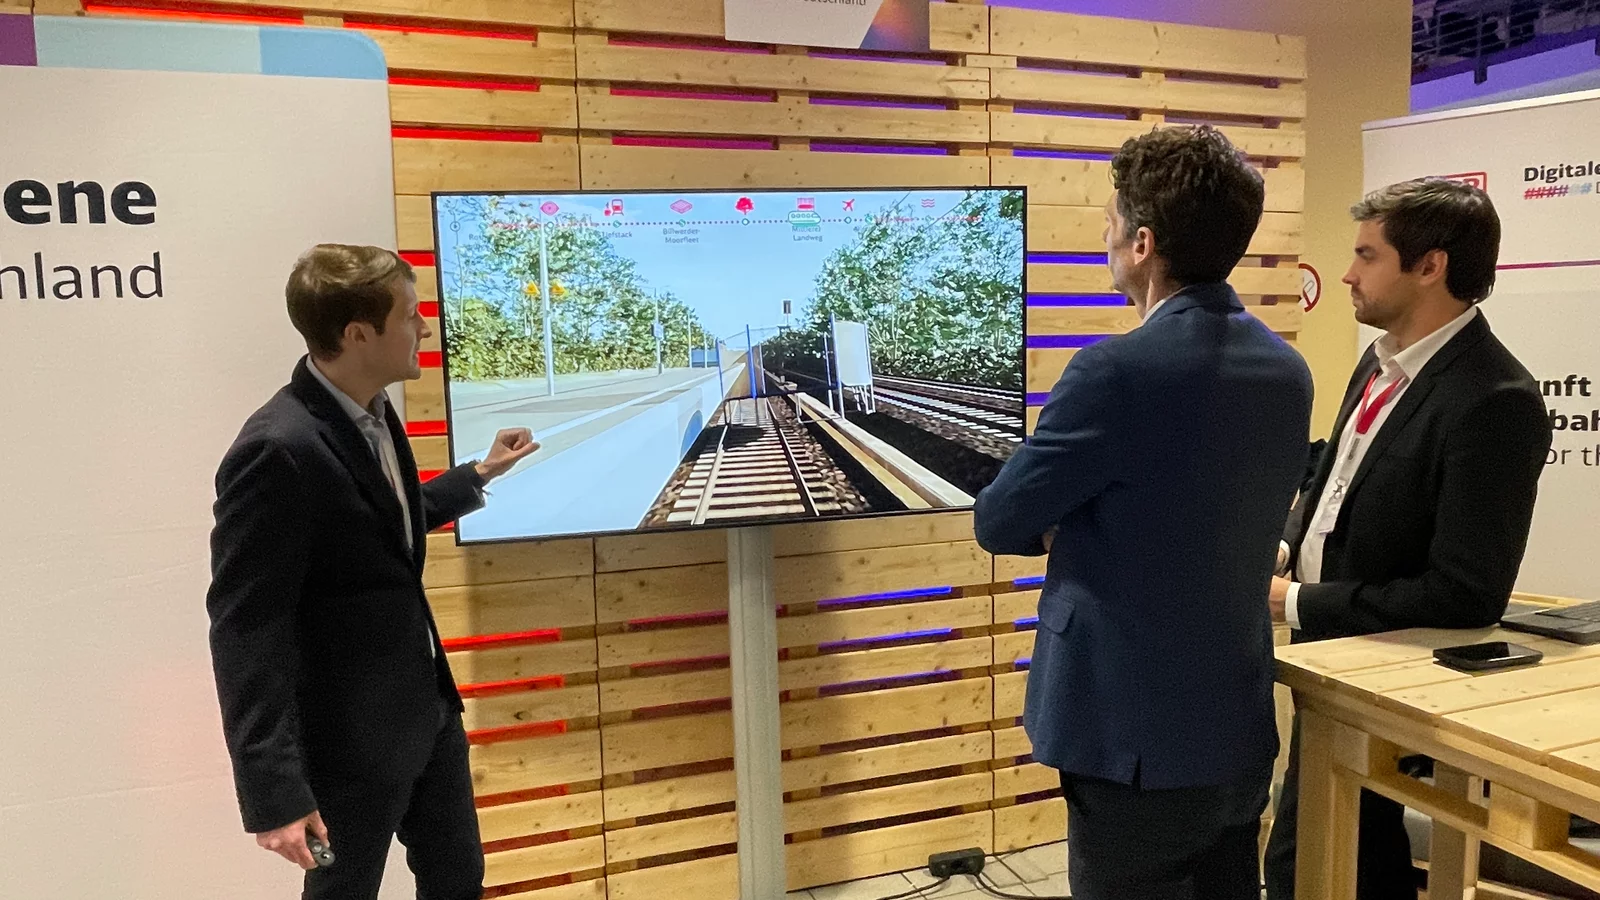 Presentation of the first photorealistic digital twin of a railway line at the Digital Summit in Jena